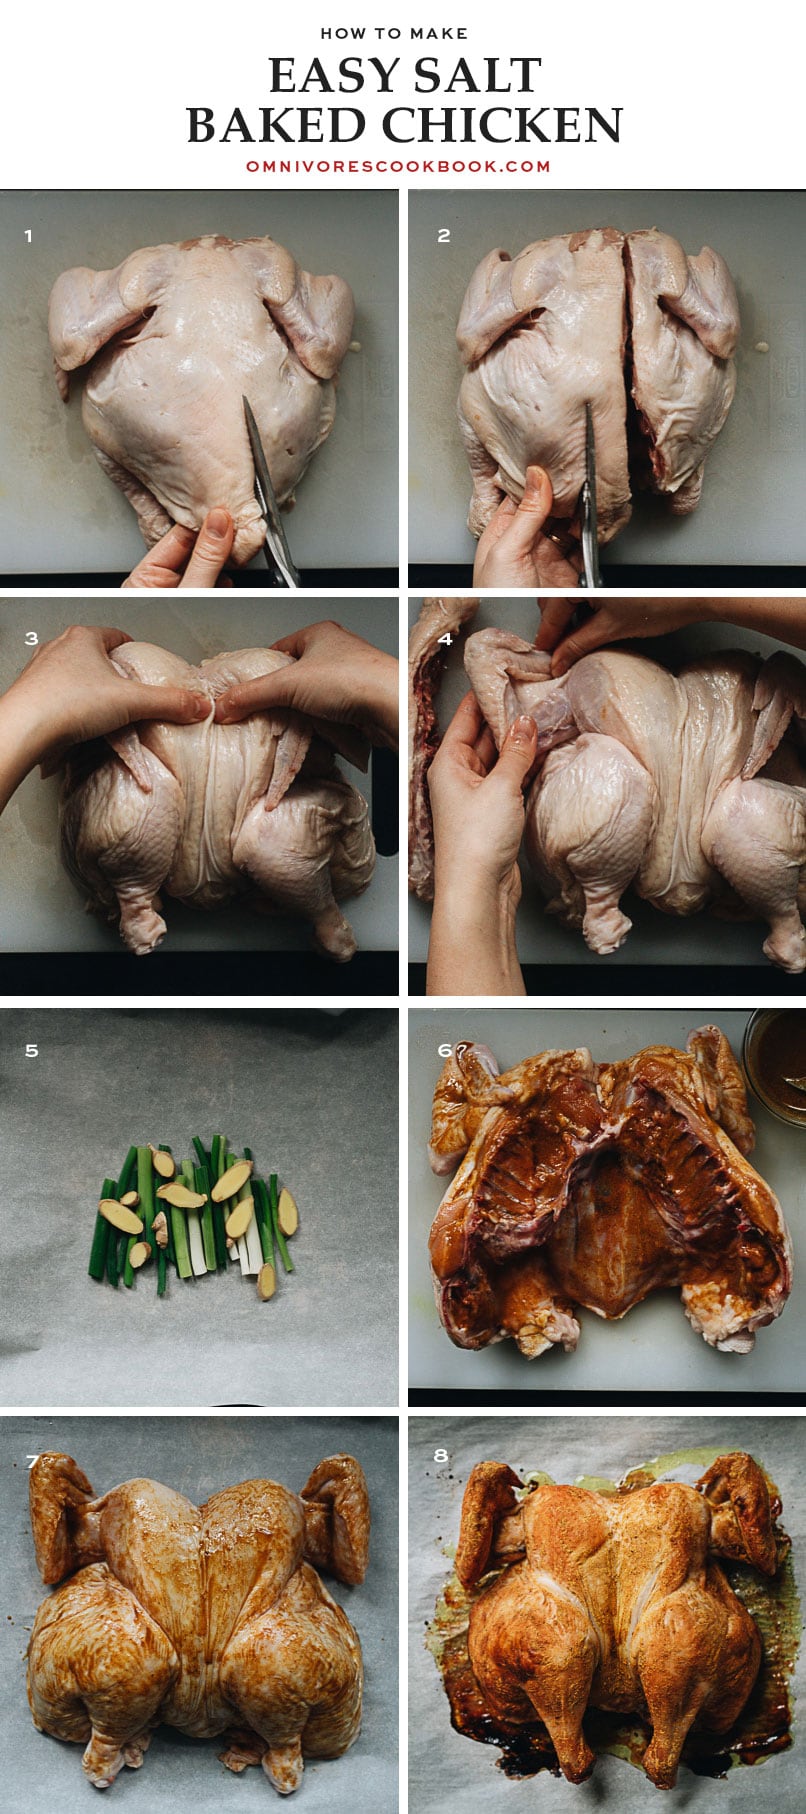 How to make salt baked chicken cooking step-by-step